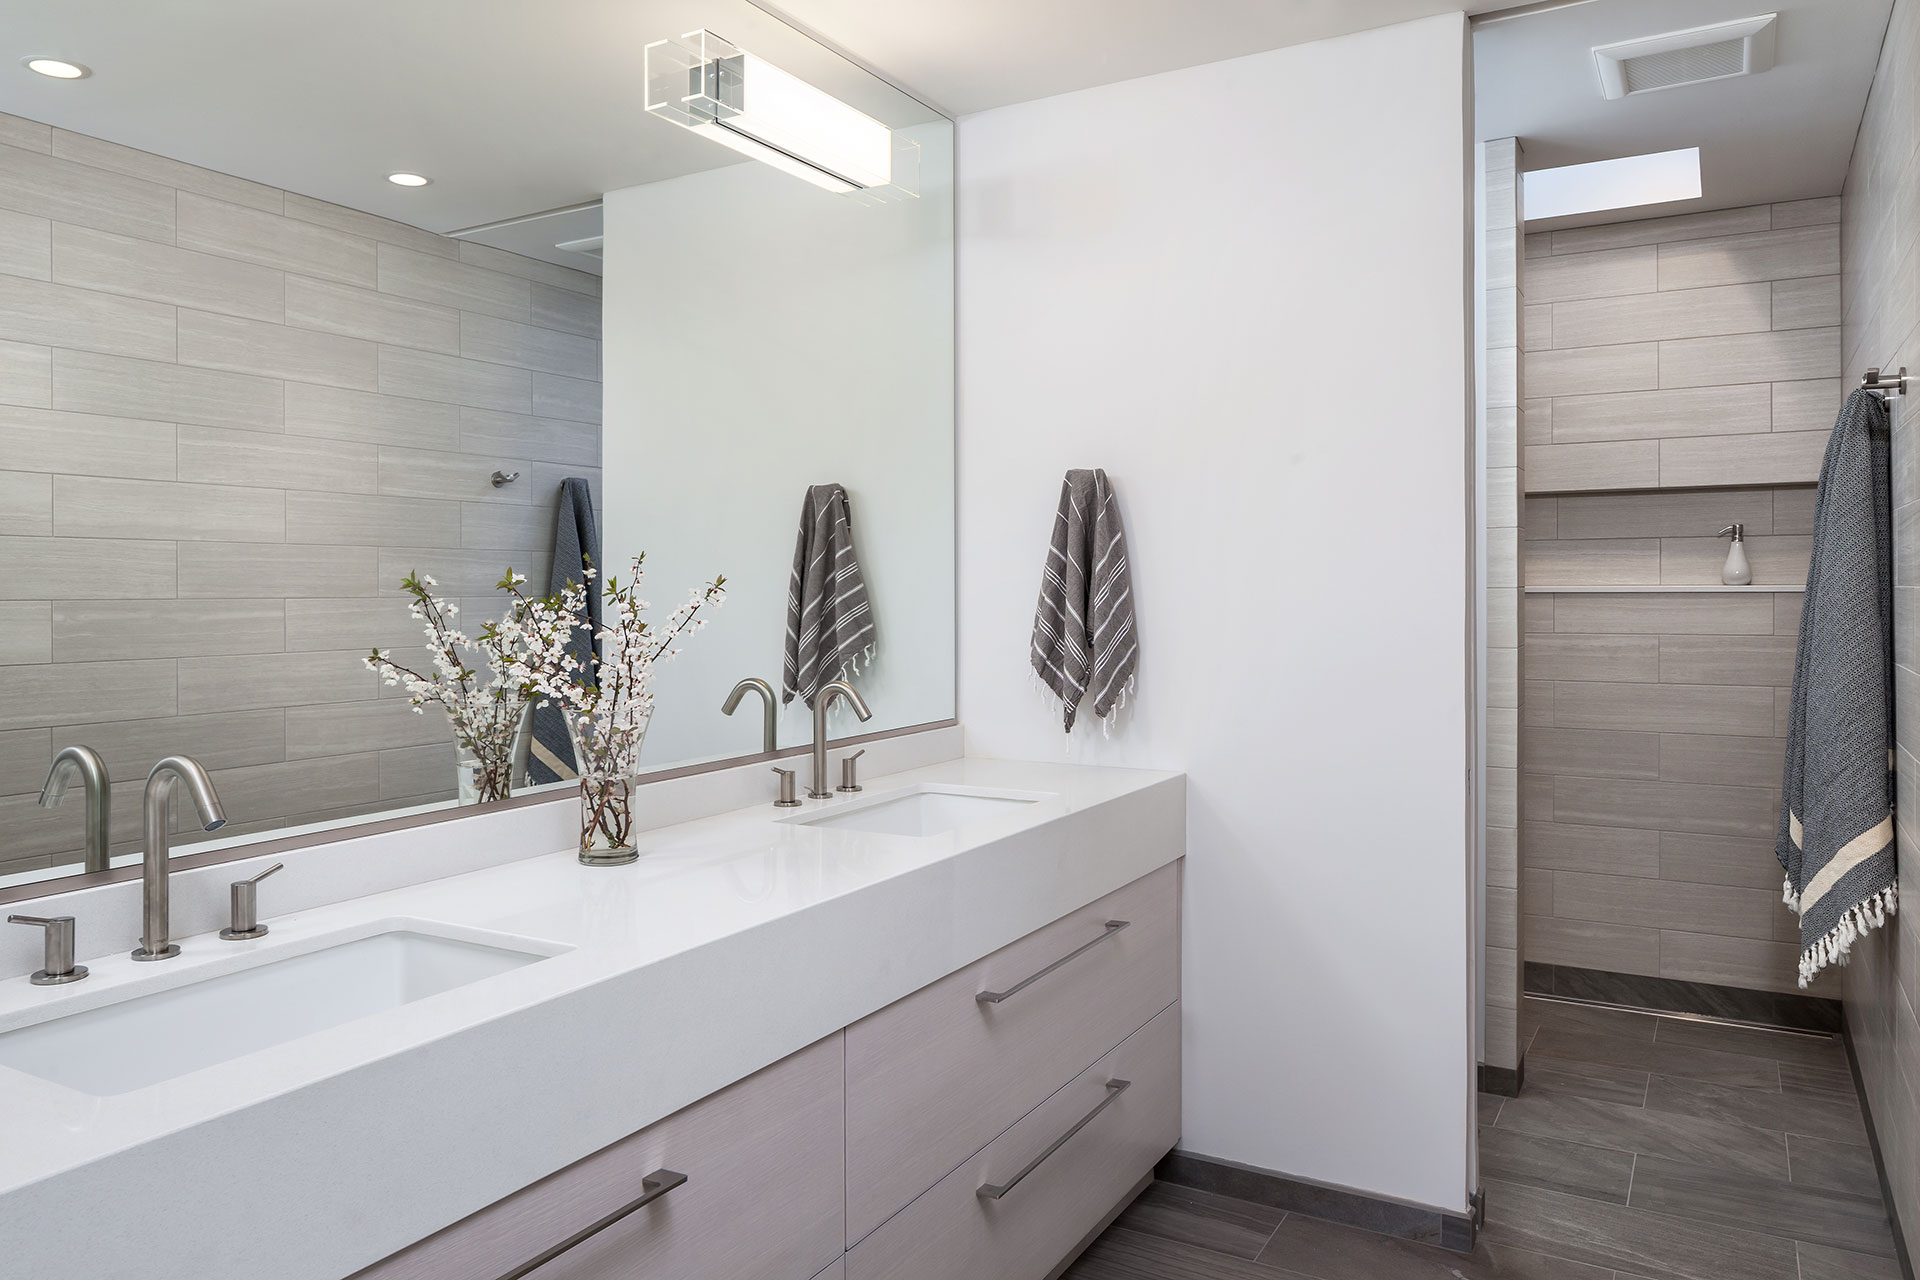 A large mirror above the sink vanity creates the illusion of a larger space in the primary bathroom. A cureless, walk-in shower with a tiled niche is in the background.